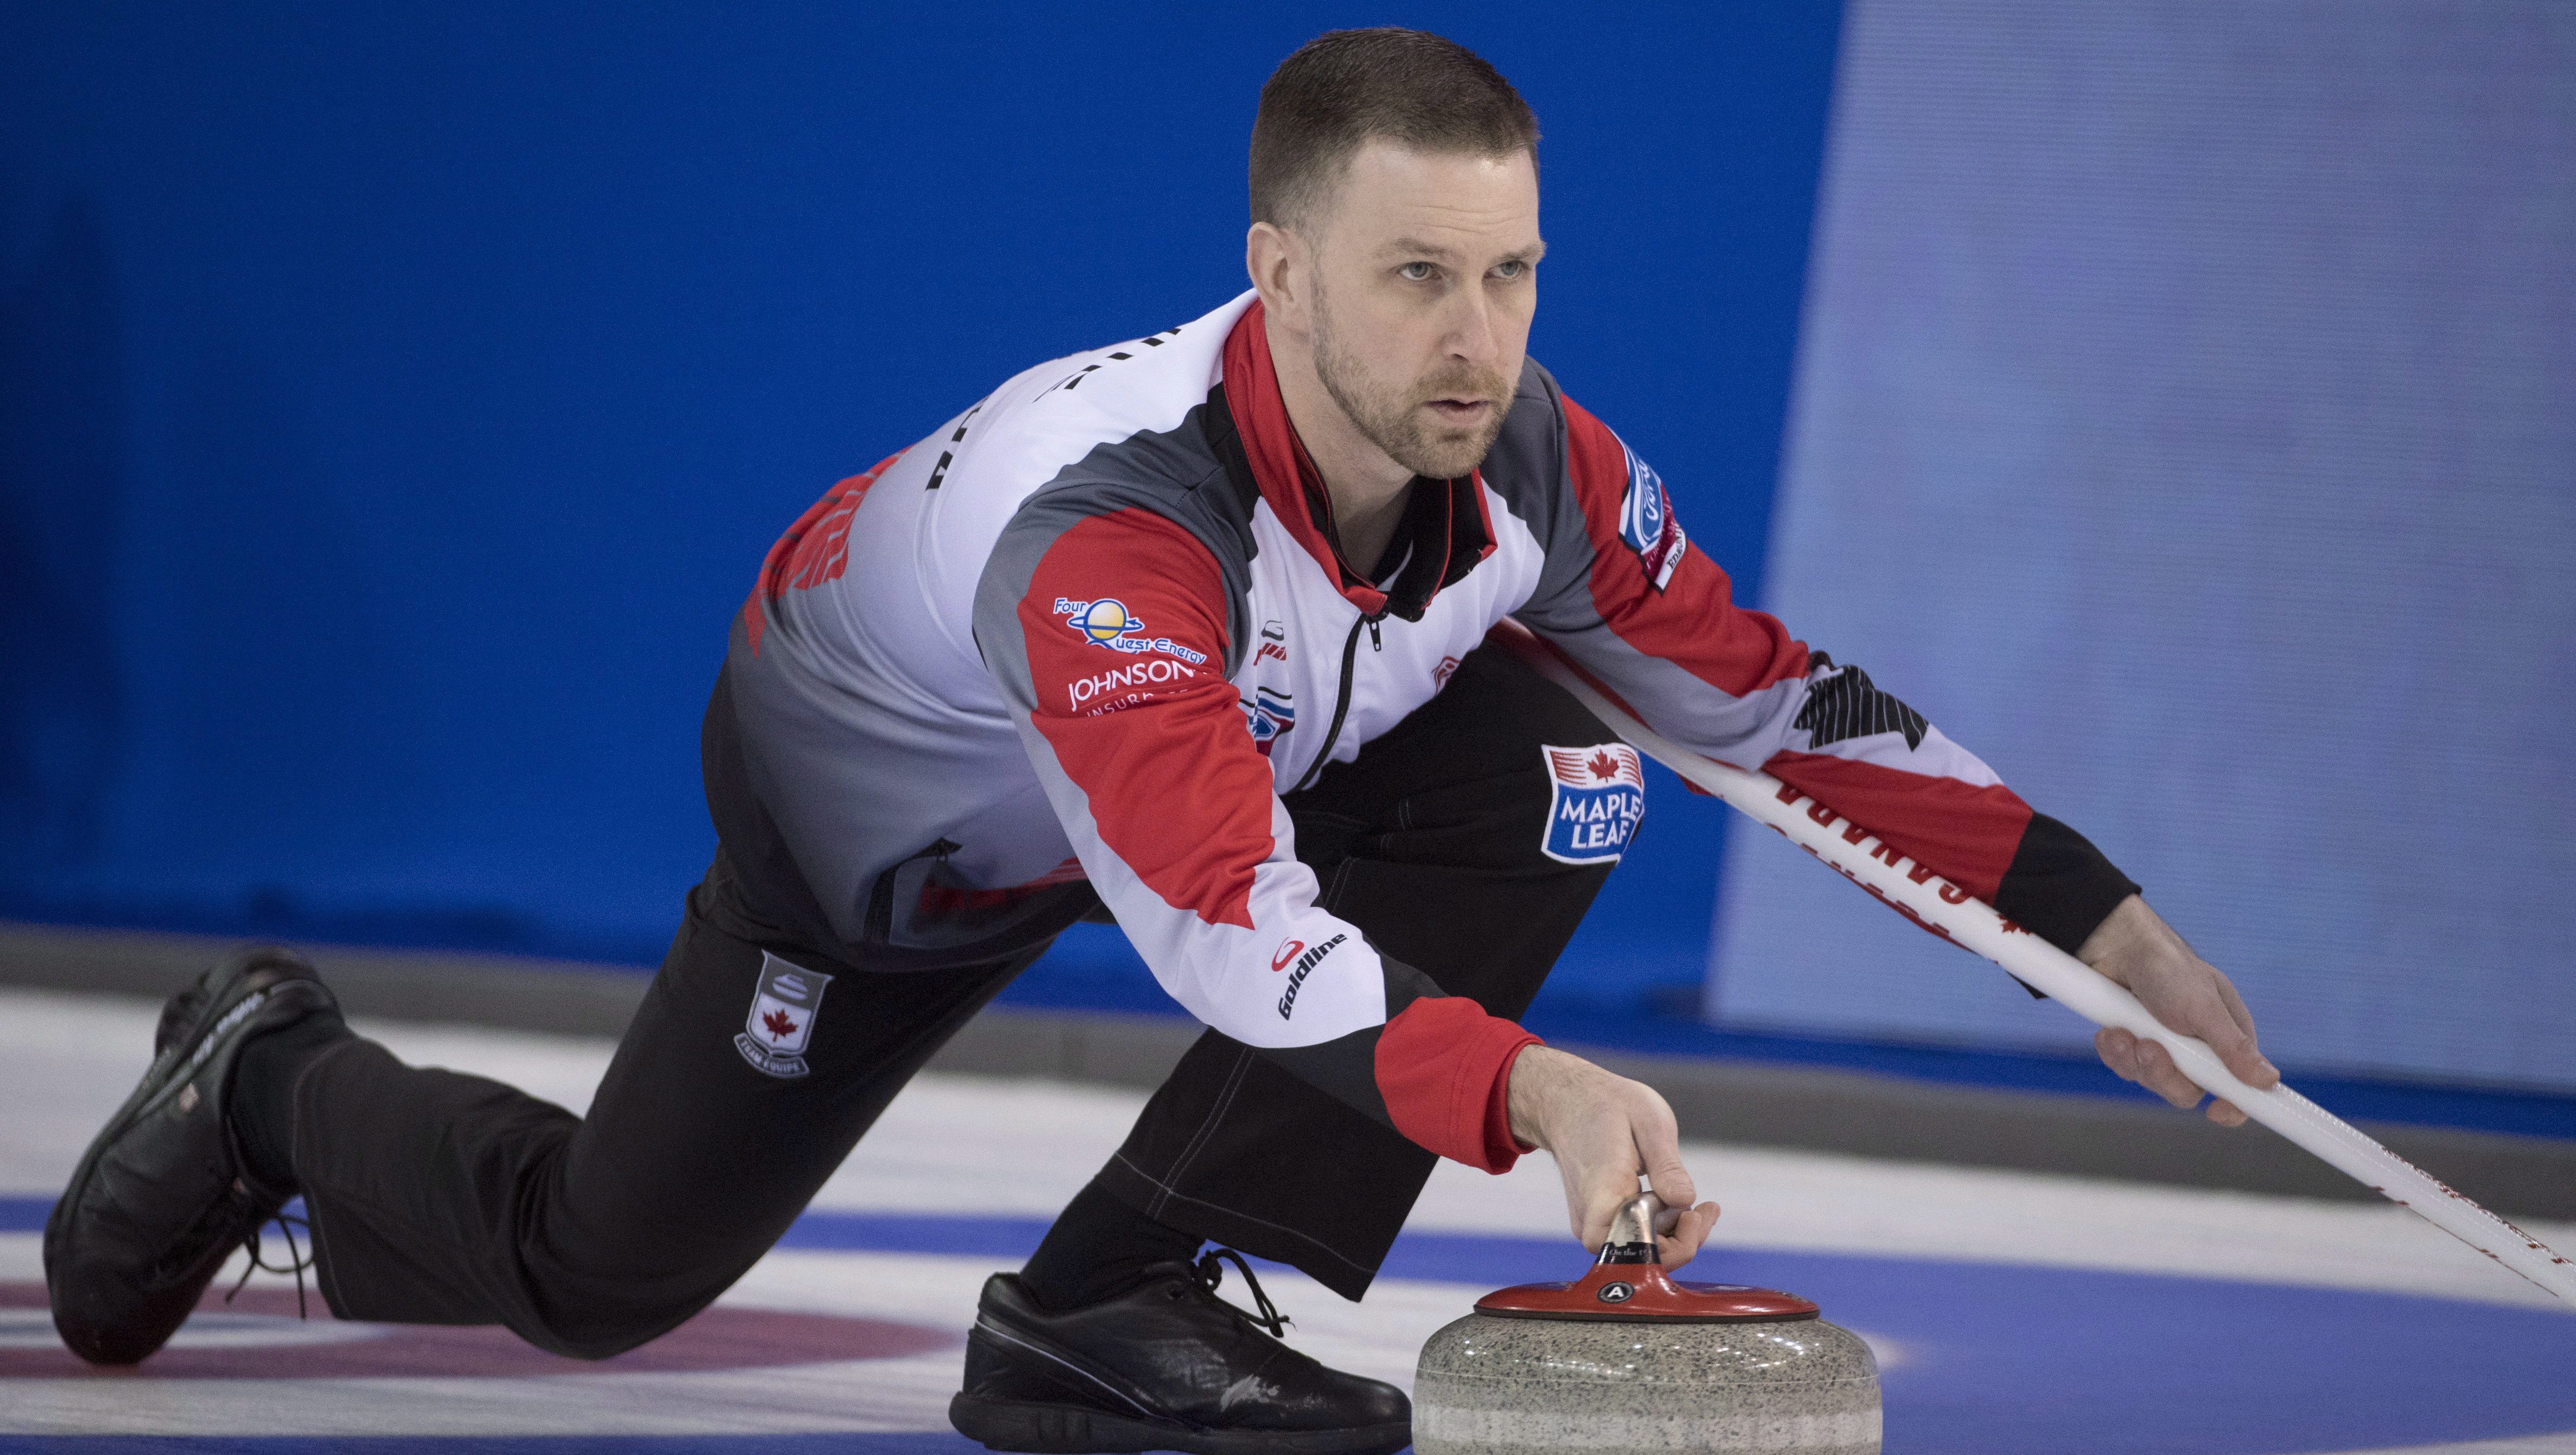 Team Canada undefeated, clinches playoff spot at men’s curling worlds Team Canada Official